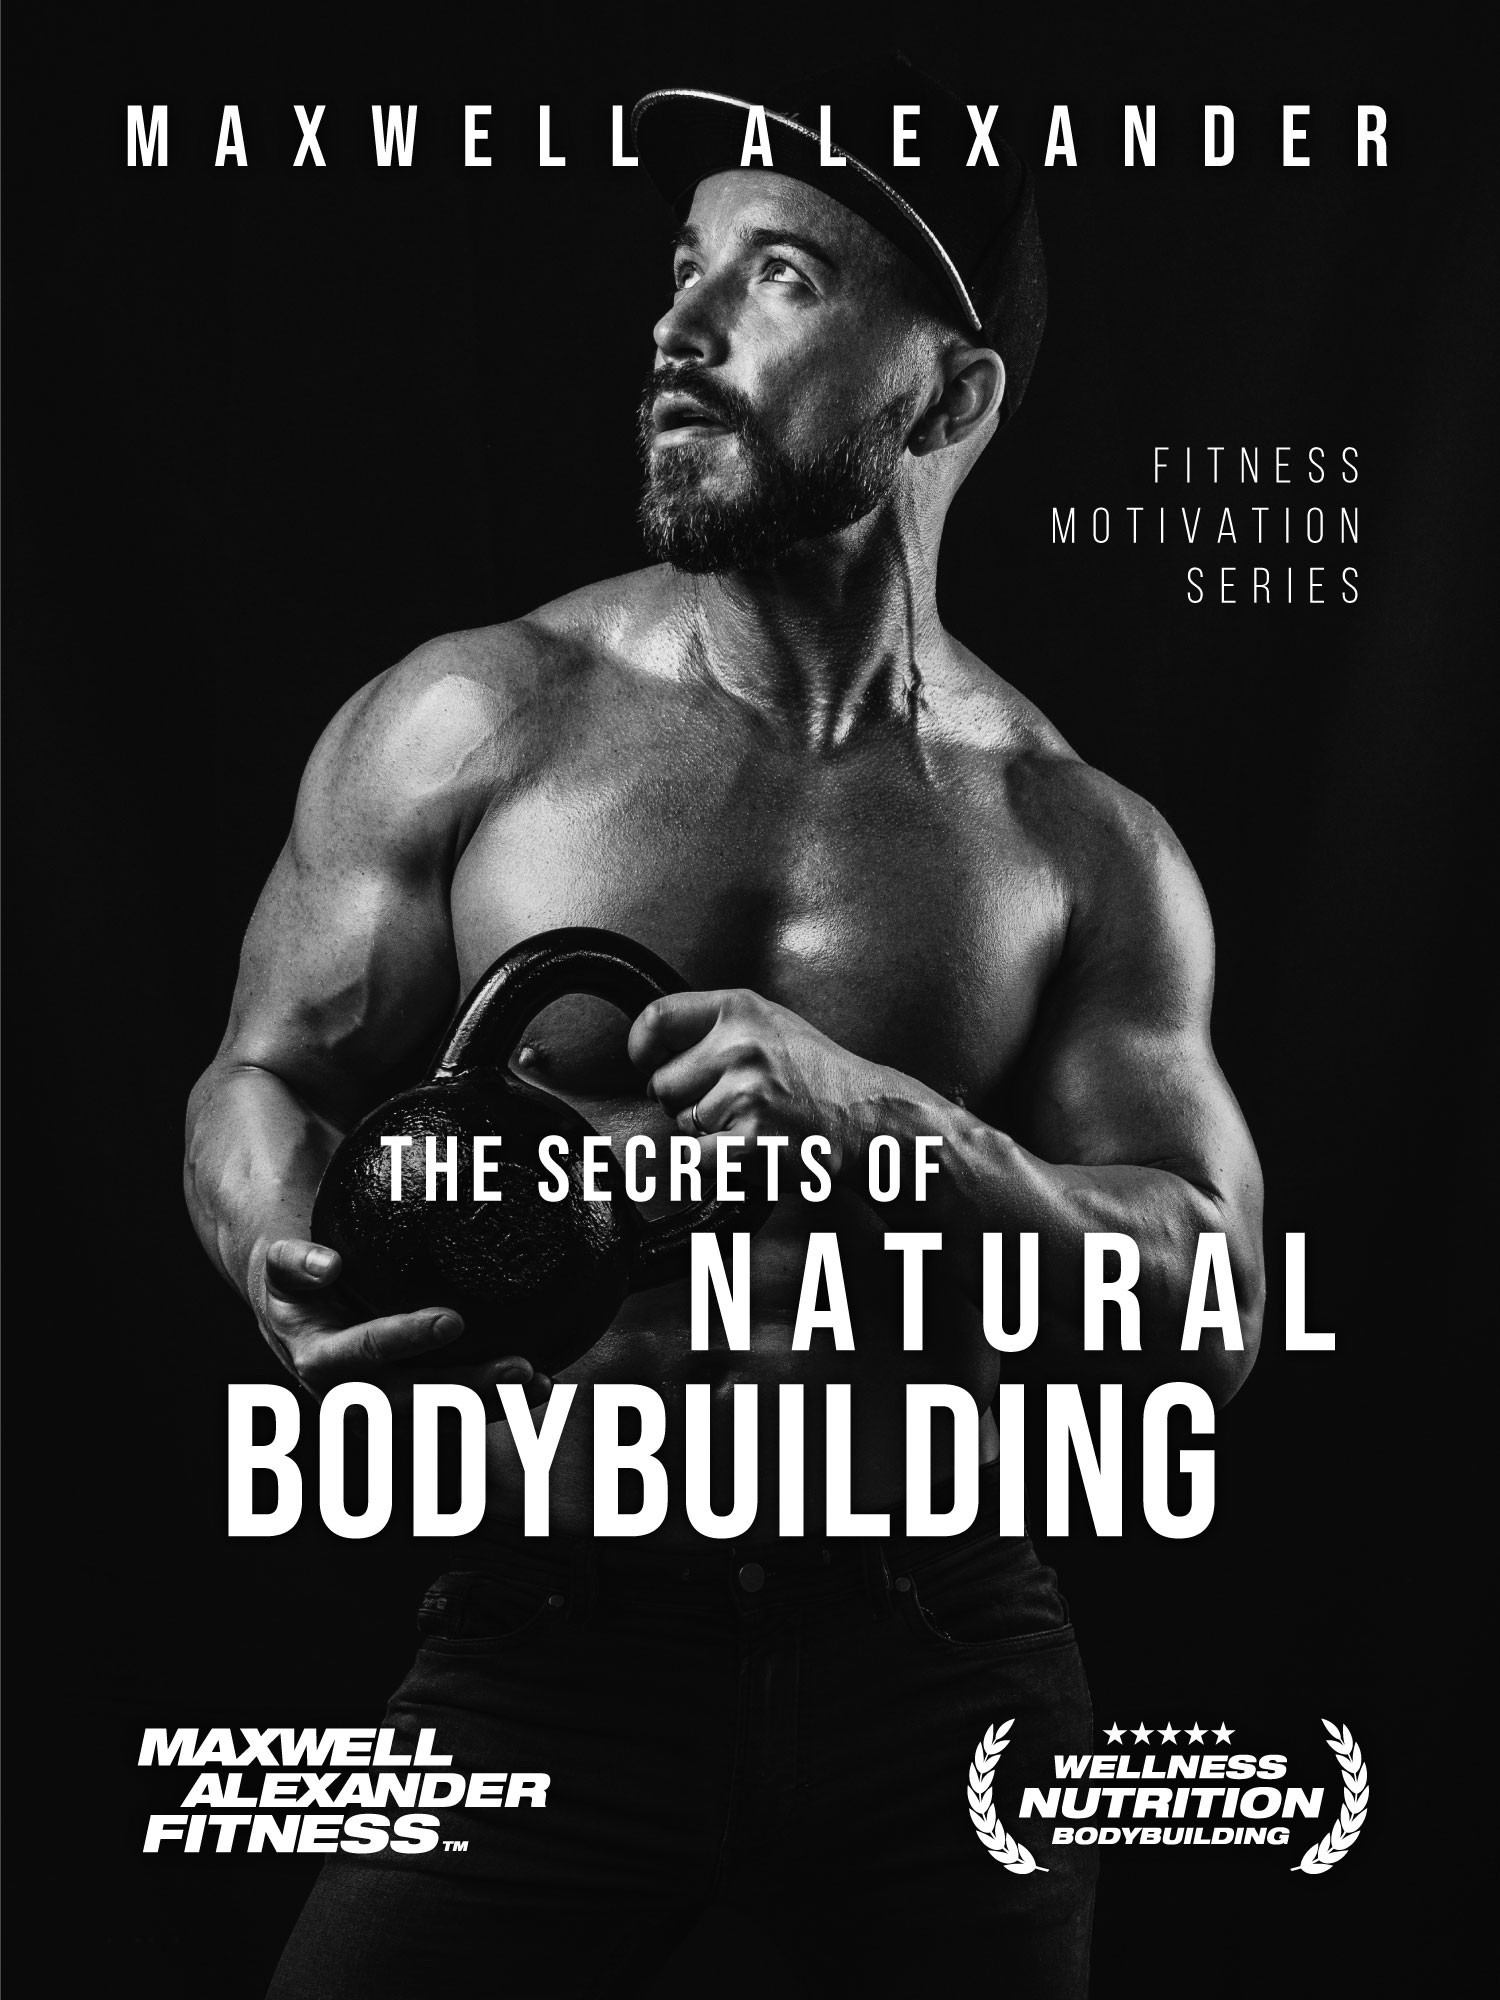 The Top 5 Tips to Increasing Muscle Mass Fast – Bodybuilding 101 with Coach Maxwell Alexander – Presented by “The Secrets of Natural Bodybuilding” on Amazon Kindle